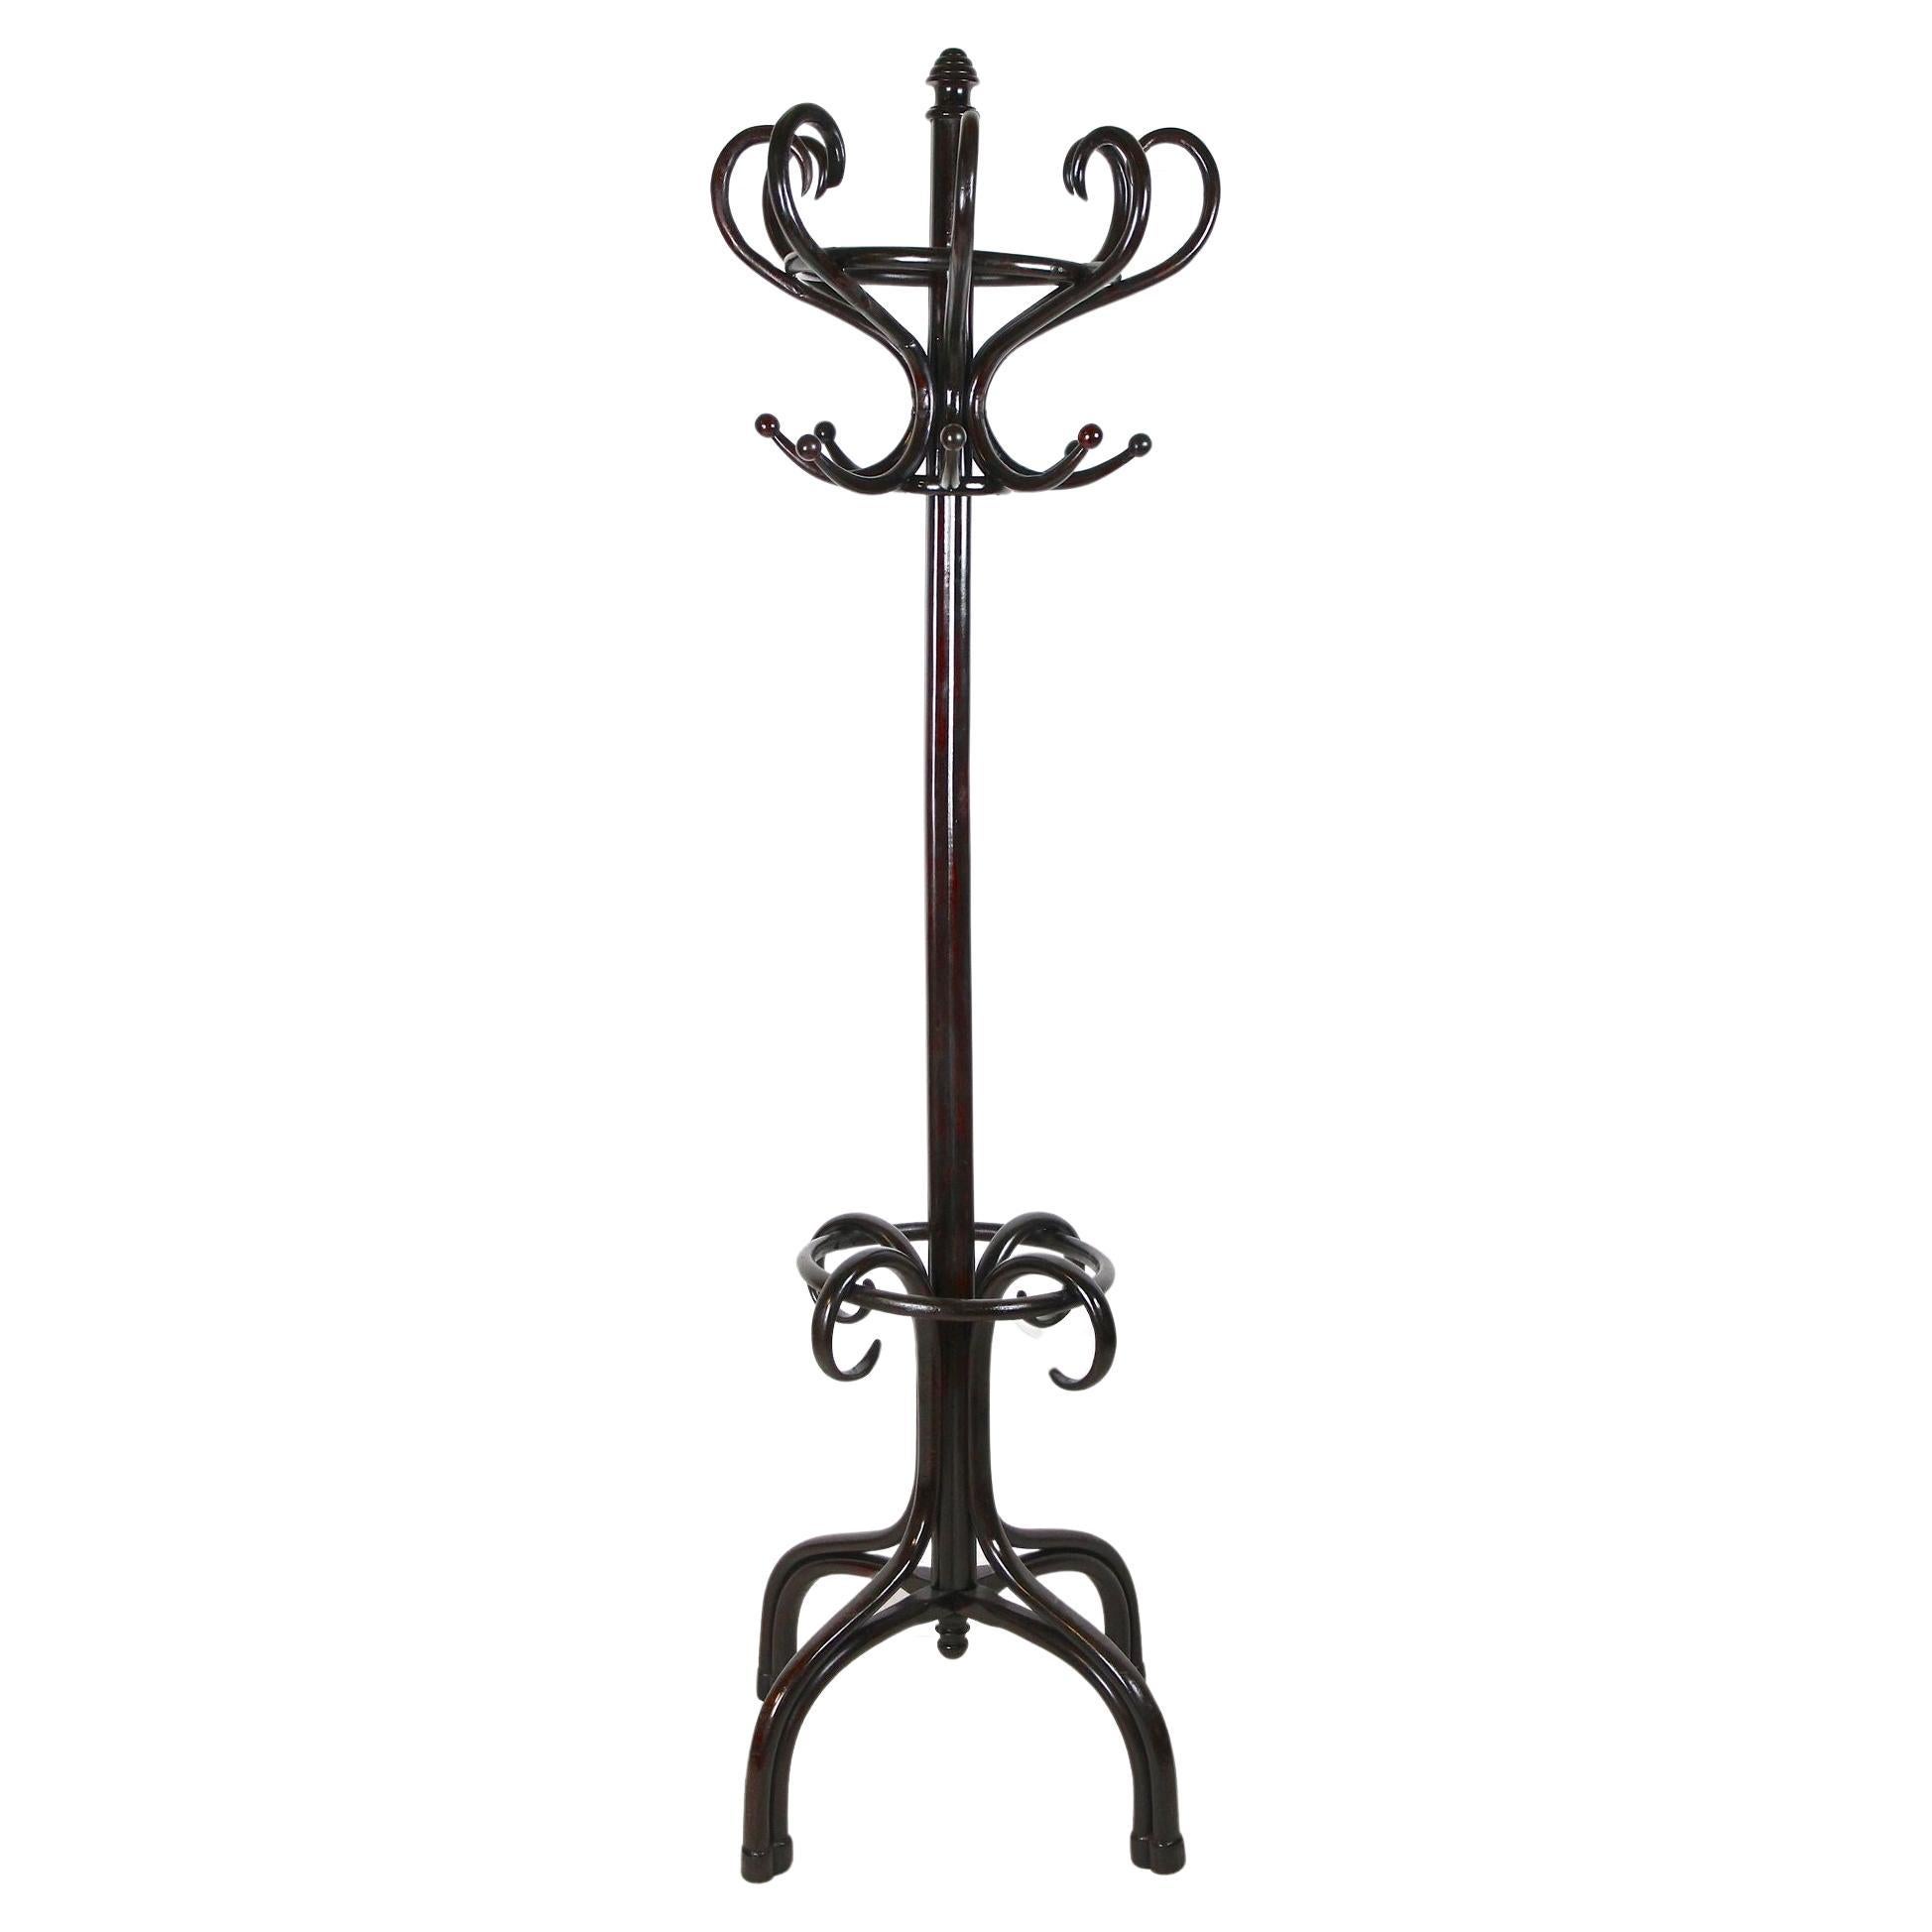 Thonet Coat Rack/ Wardrobe Stand Bentwood Polished, Art Nouveau, AT ca. 1905 For Sale